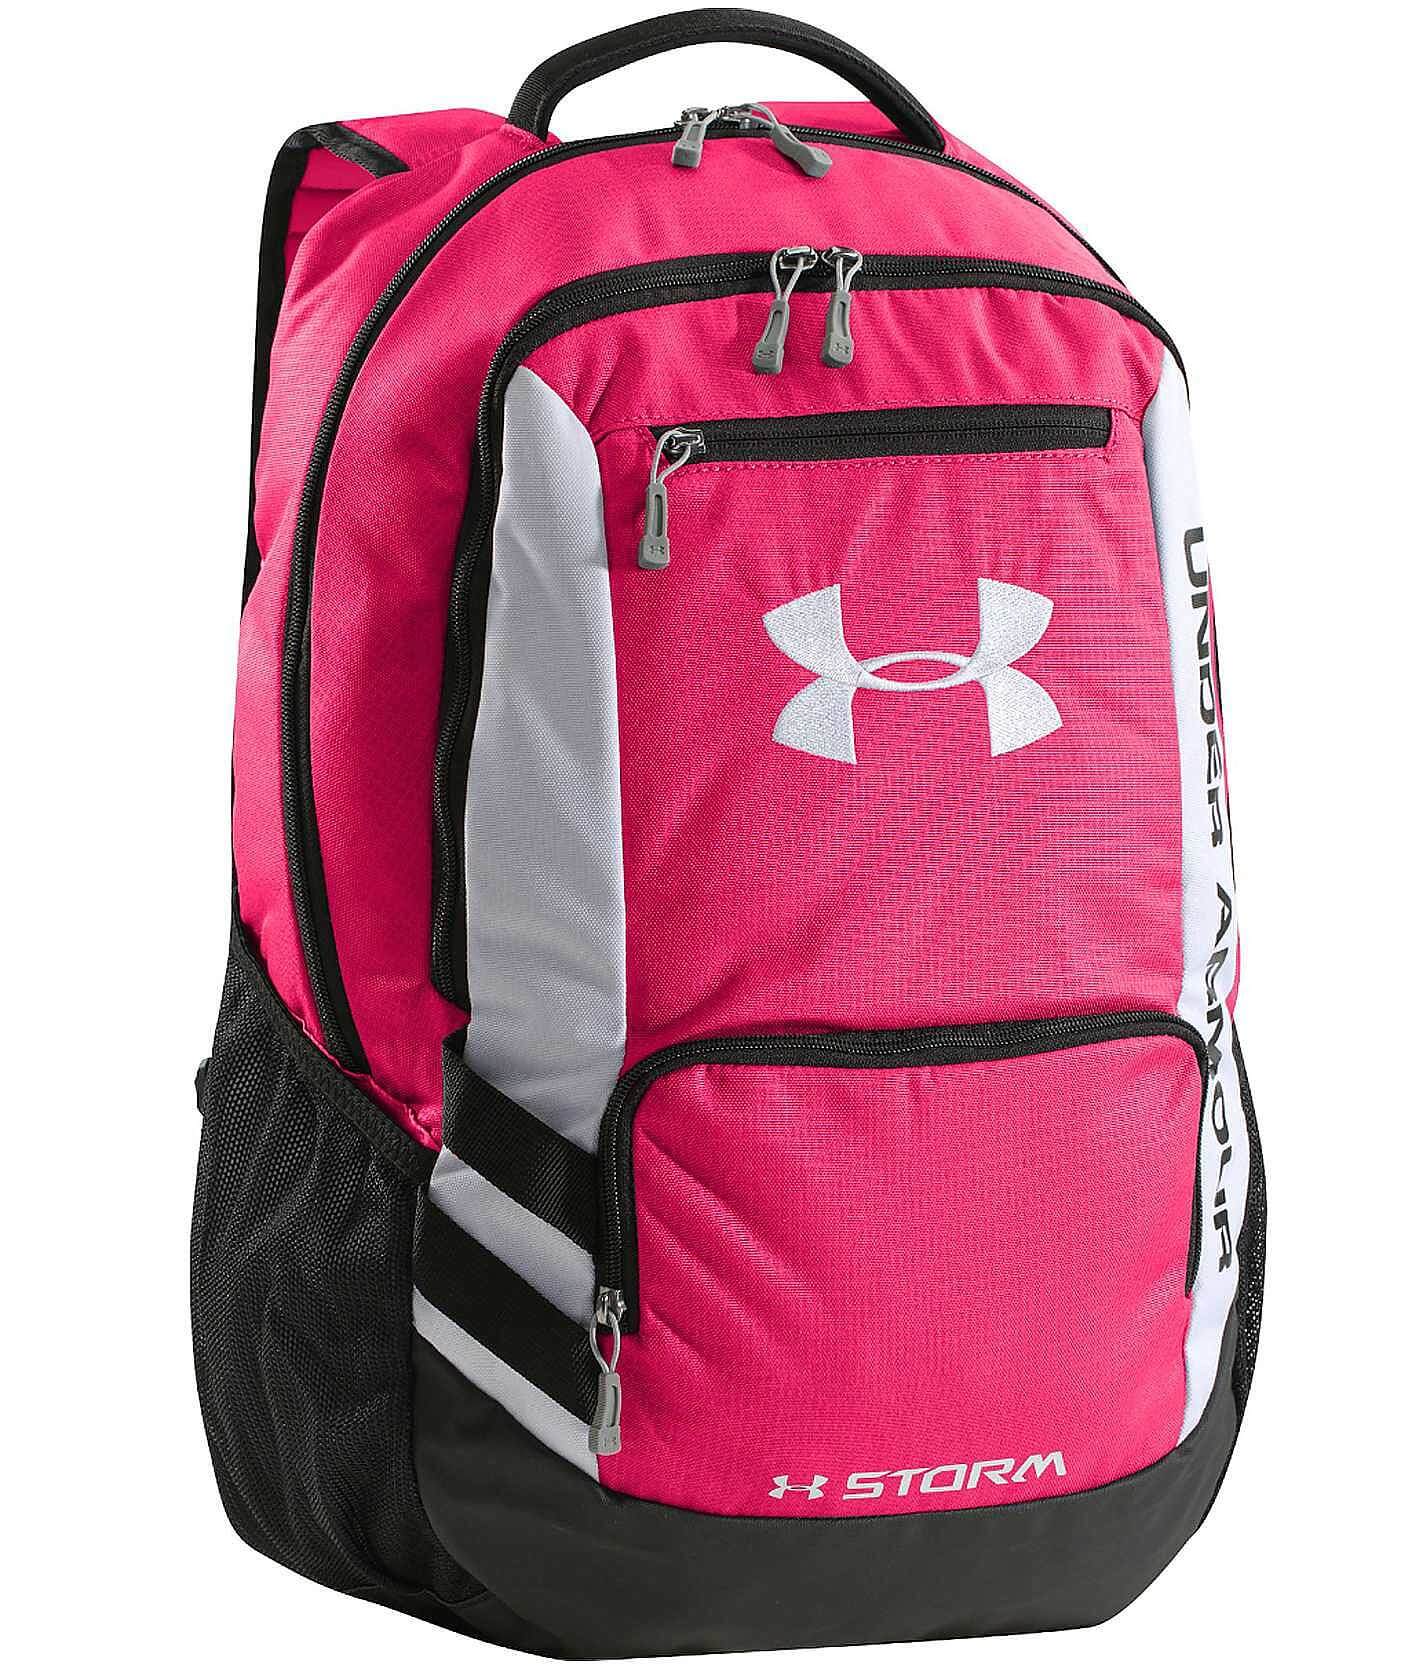 Under Armour® Hustle Backpack - Women's Accessories in Pinkadelic Lead